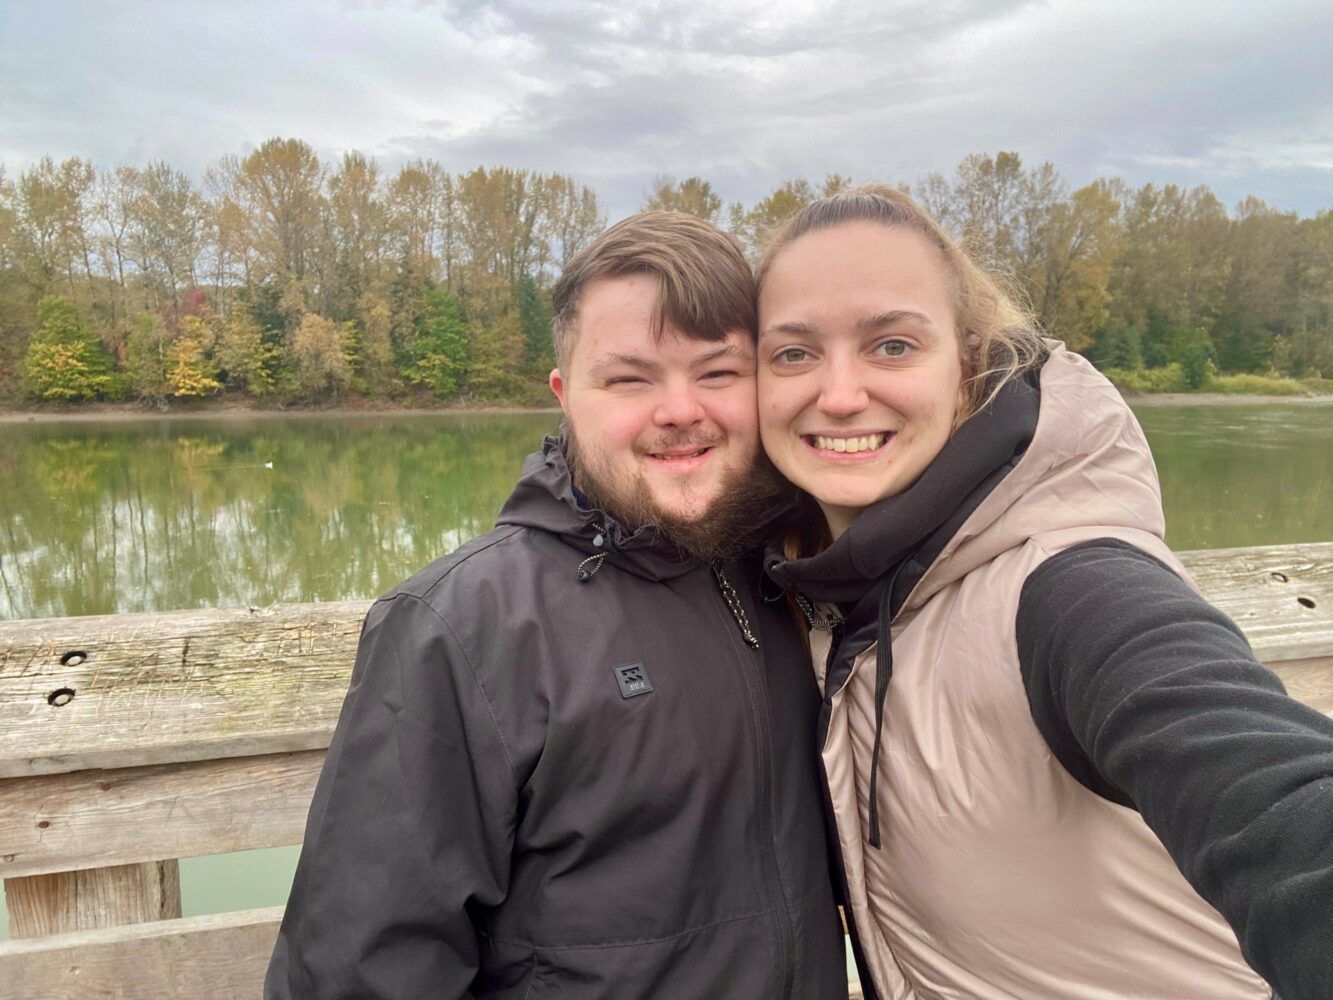 2 young adult siblings: a white man with Down syndrome and his older sister, posing together with a river behind them